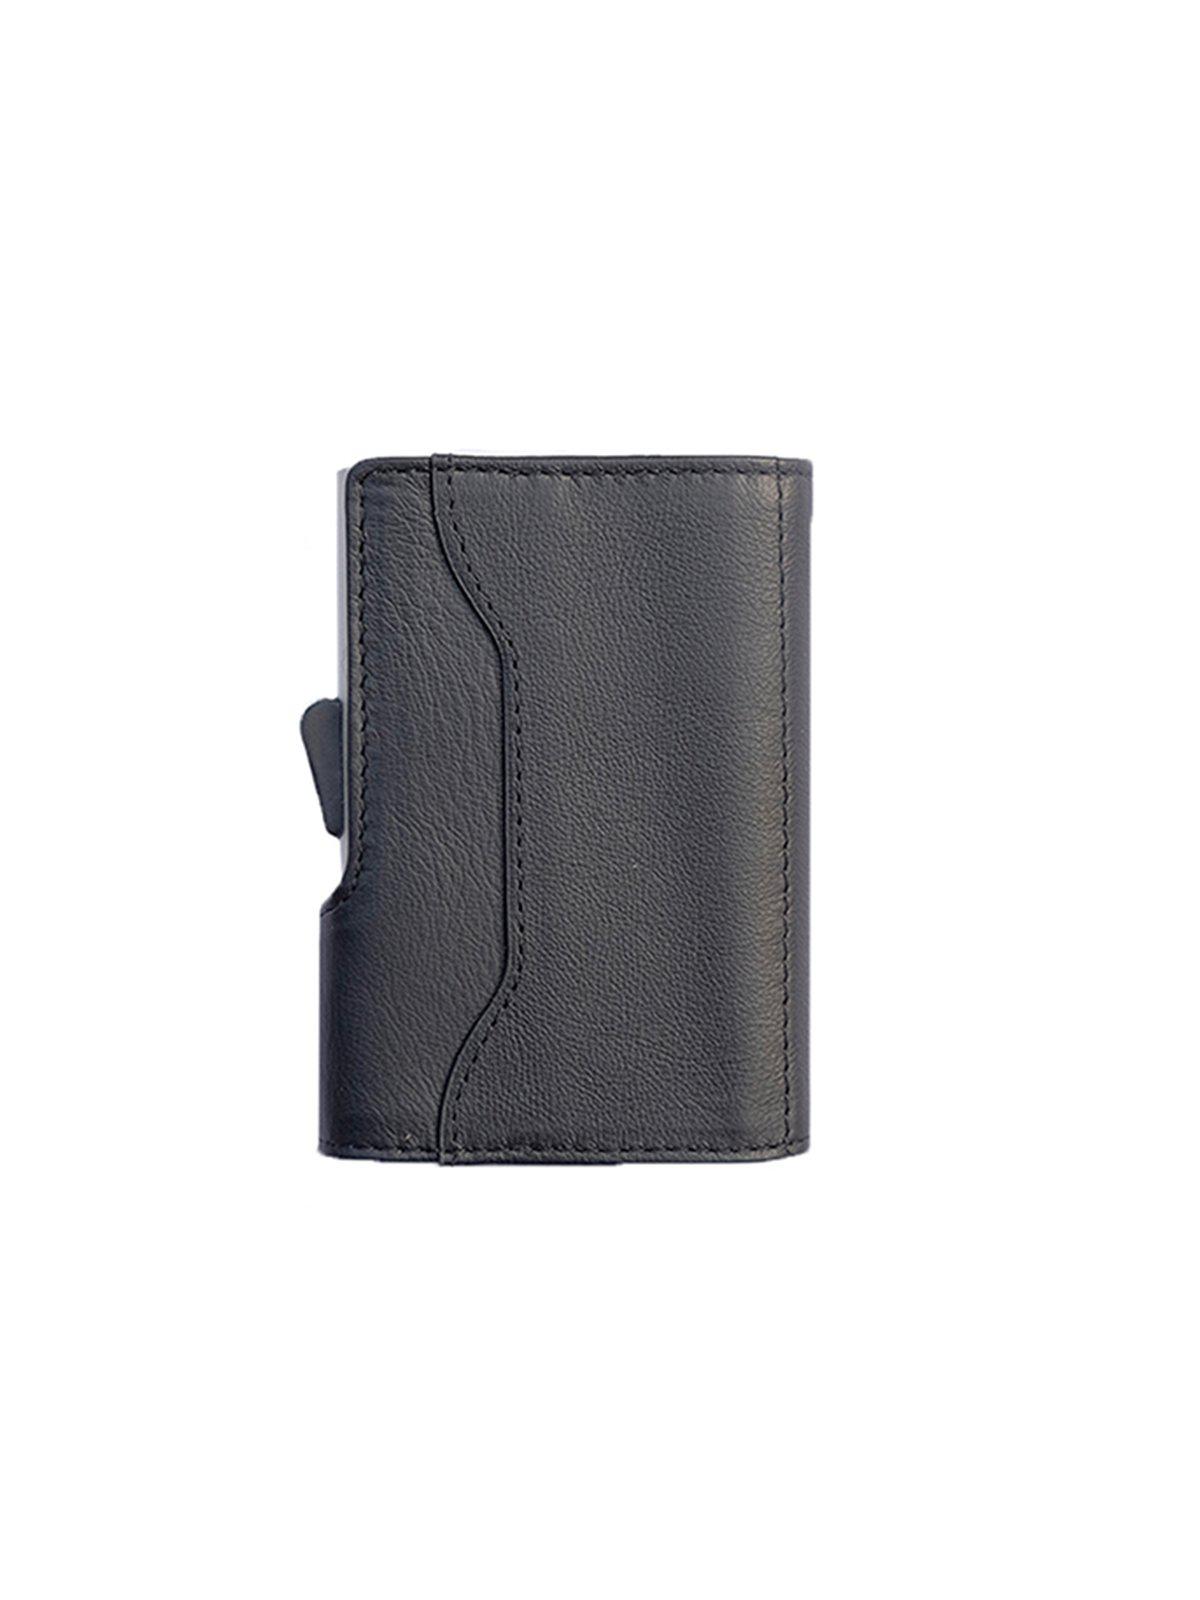 C-Secure Italian Leather RFID Wallet Nero - MORE by Morello Indonesia